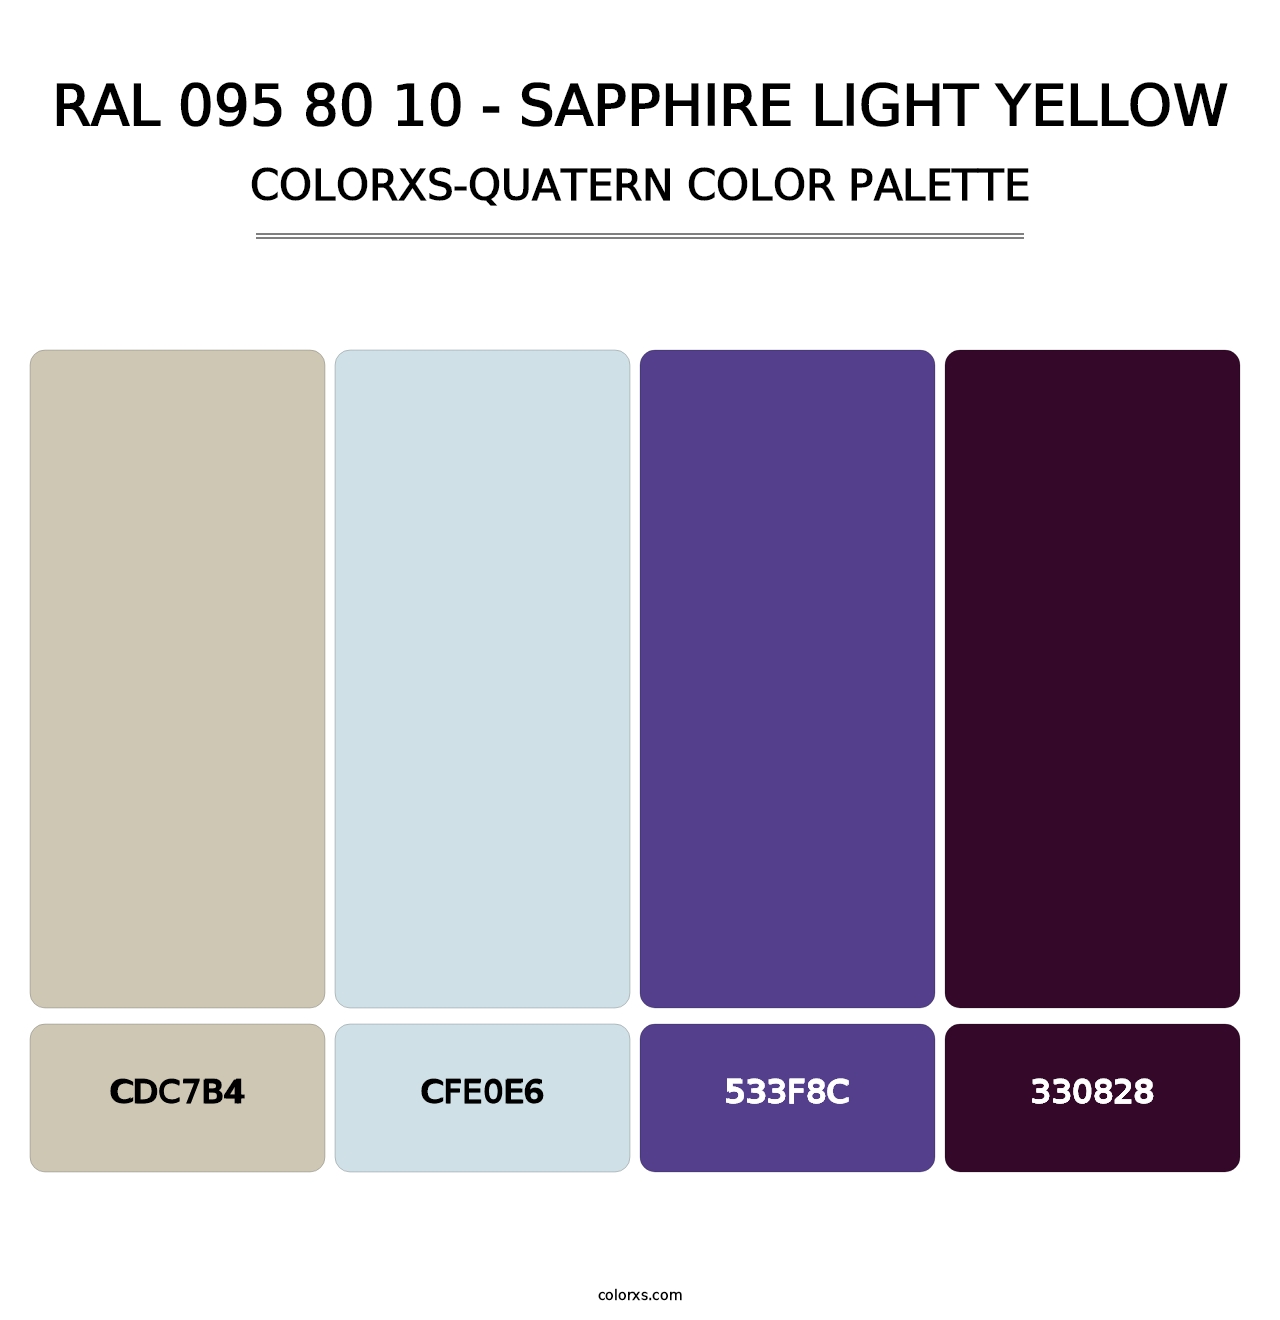 RAL 095 80 10 - Sapphire Light Yellow - Colorxs Quatern Palette